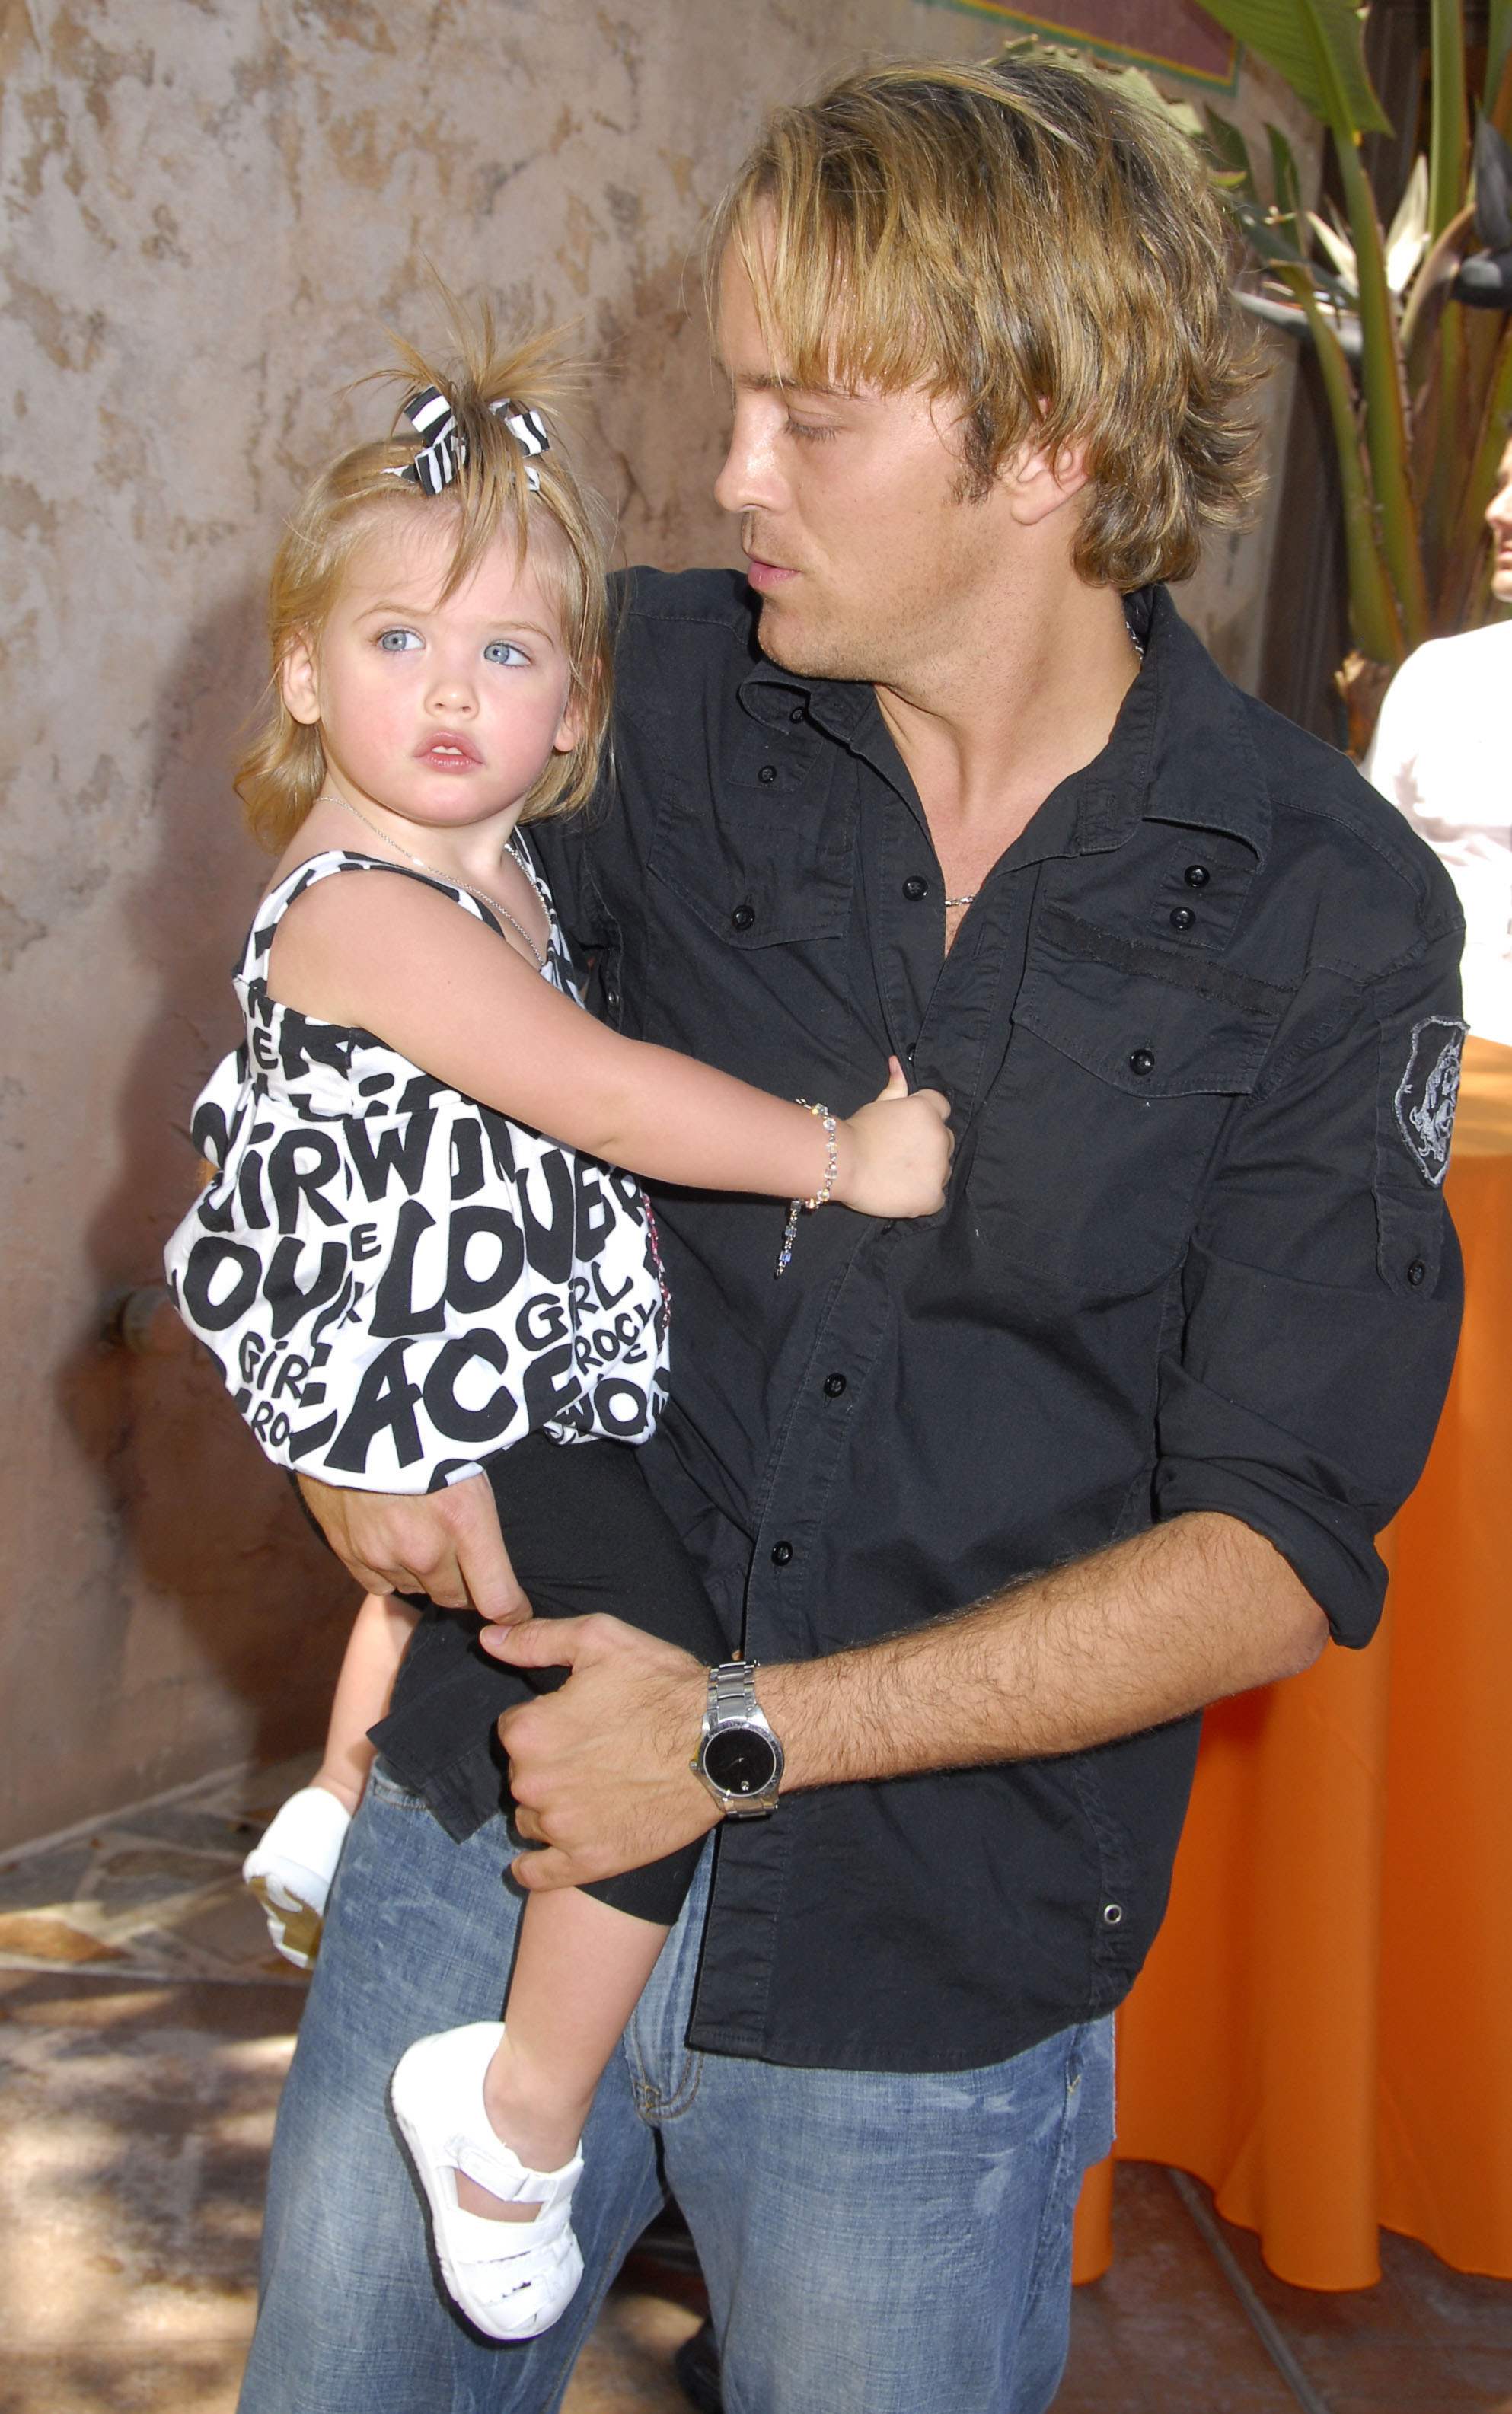 Dannielynn Birkhead and Larry Birkhead at the Launch celebration party for The Simpson's Ride at Universal Studios Hollywood on May 17, 2008 in Universal City, California. | Source: Getty Images